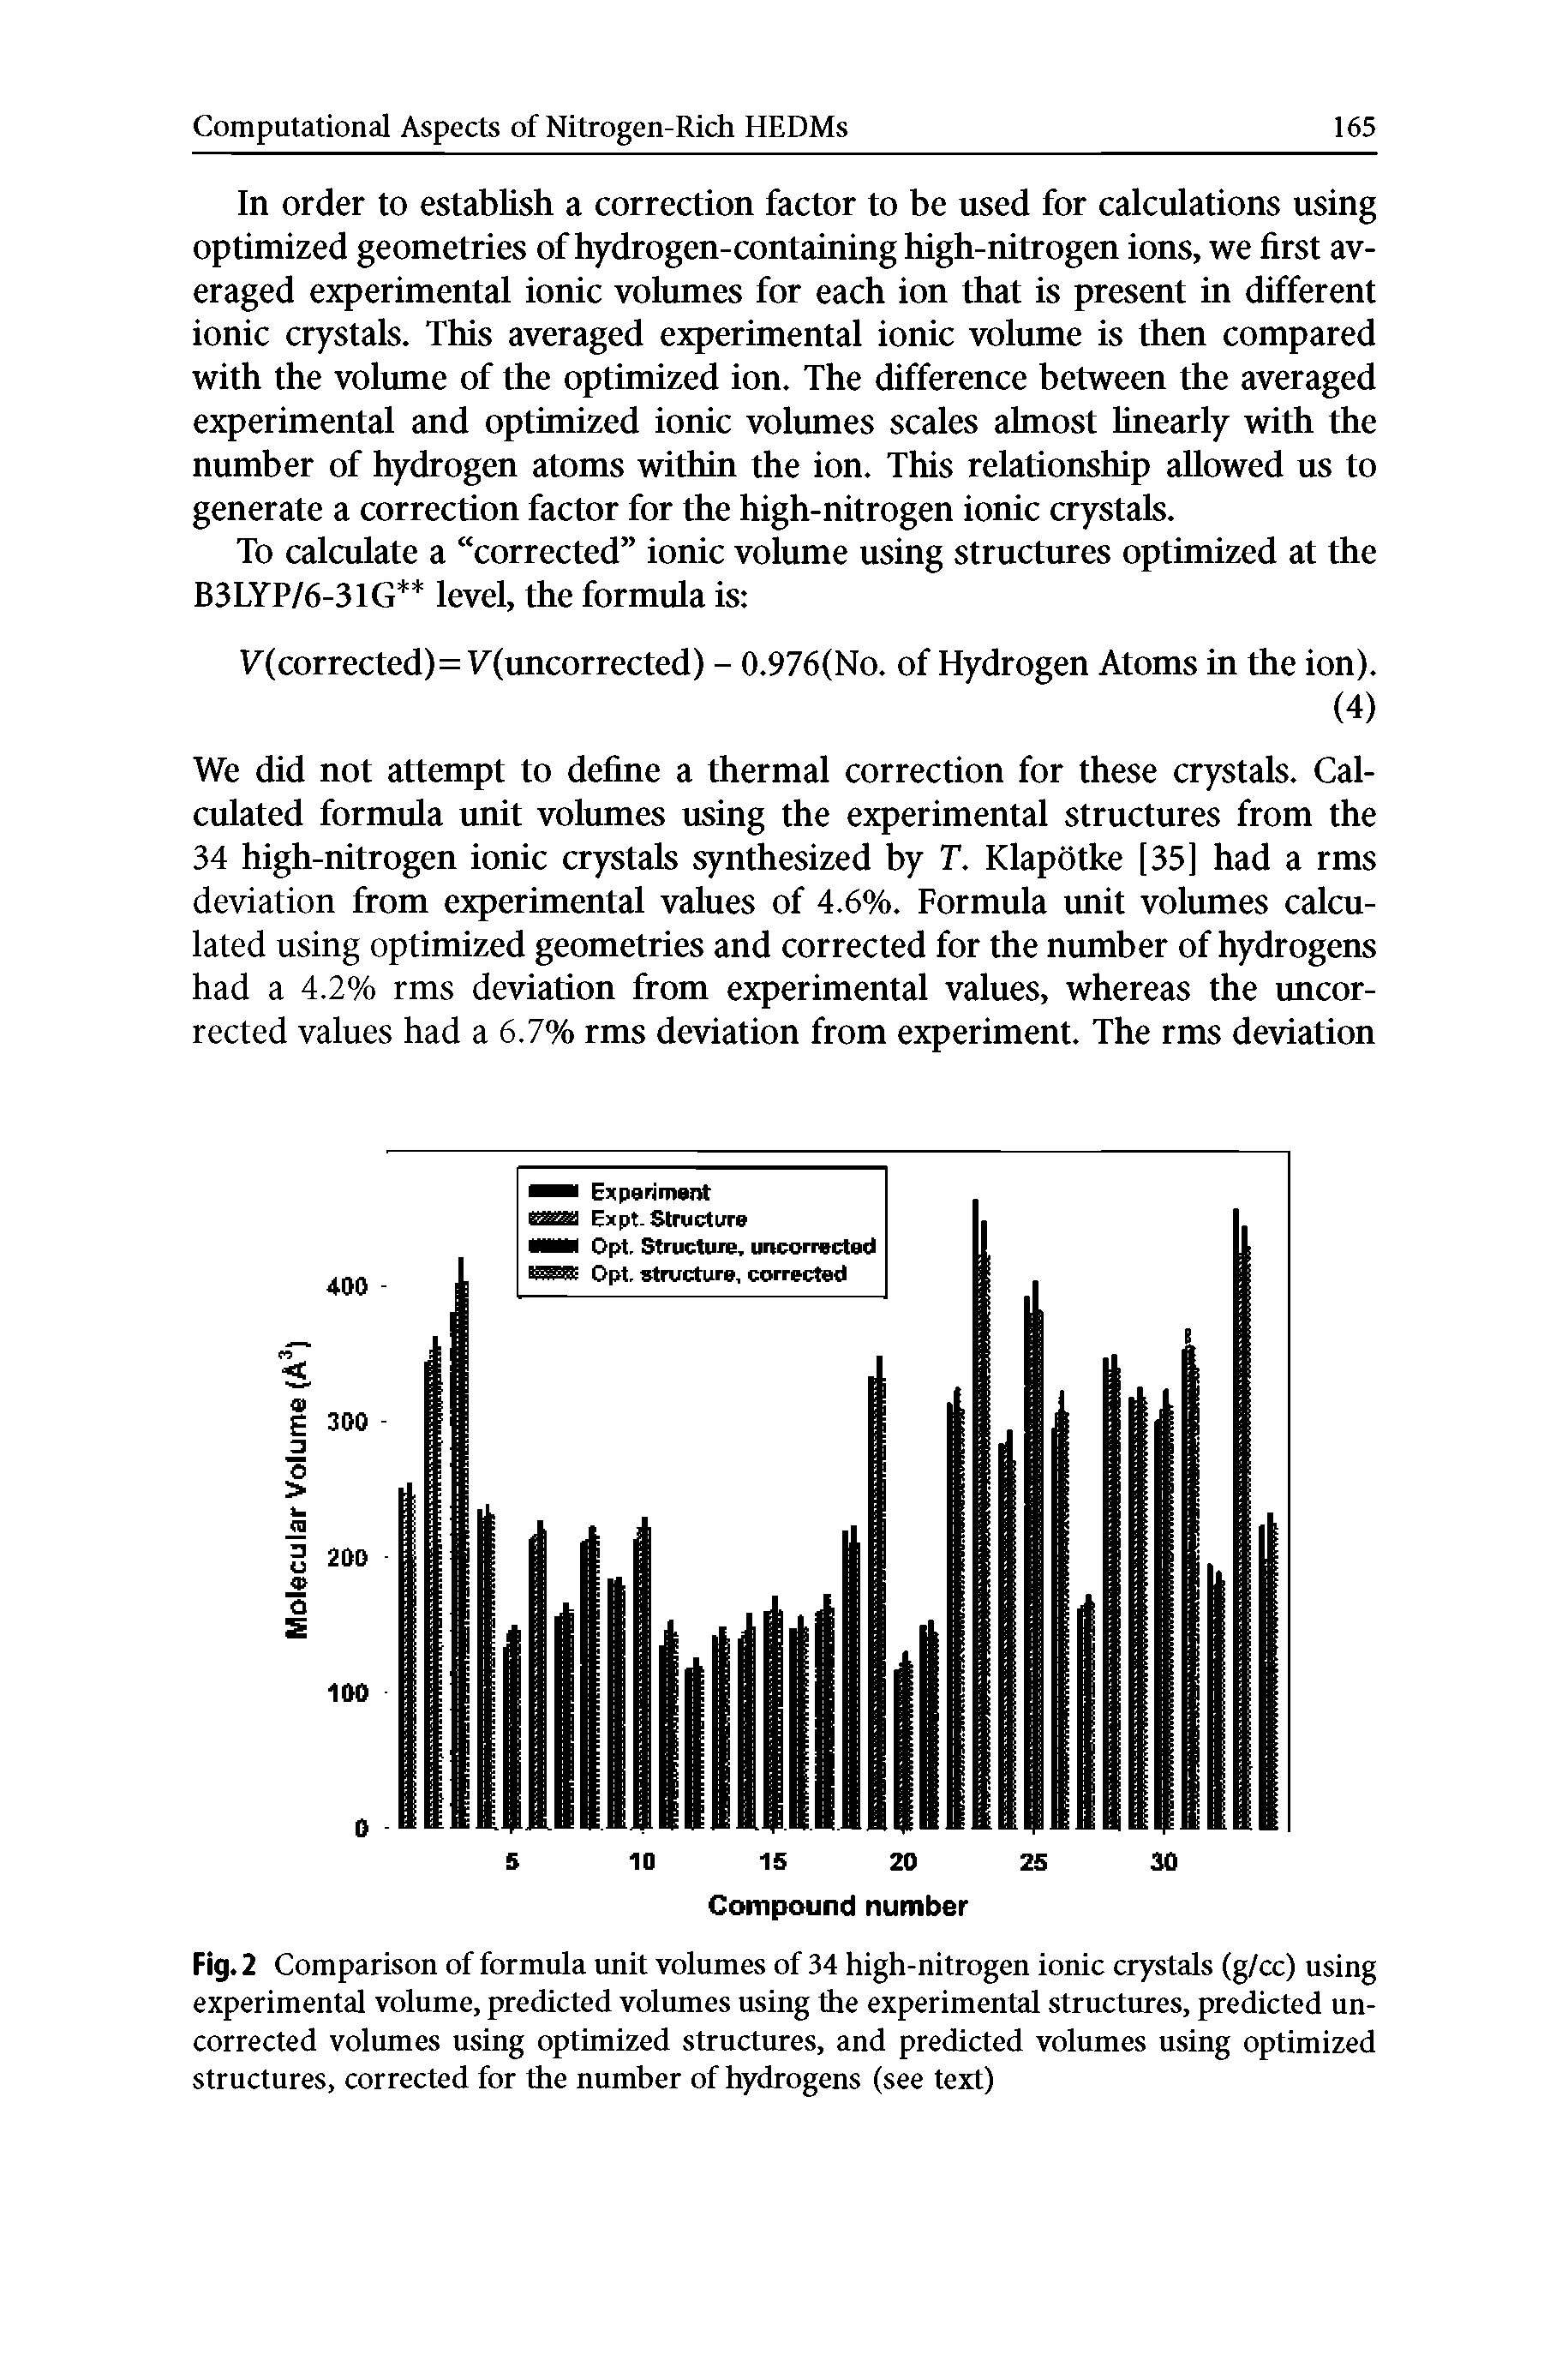 Fig. 2 Comparison of formula unit volumes of 34 high-nitrogen ionic crystals (g/cc) using experimental volume, predicted volumes using the experimental structures, predicted uncorrected volumes using optimized structures, and predicted volumes using optimized structures, corrected for the number of hydrogens (see text)...